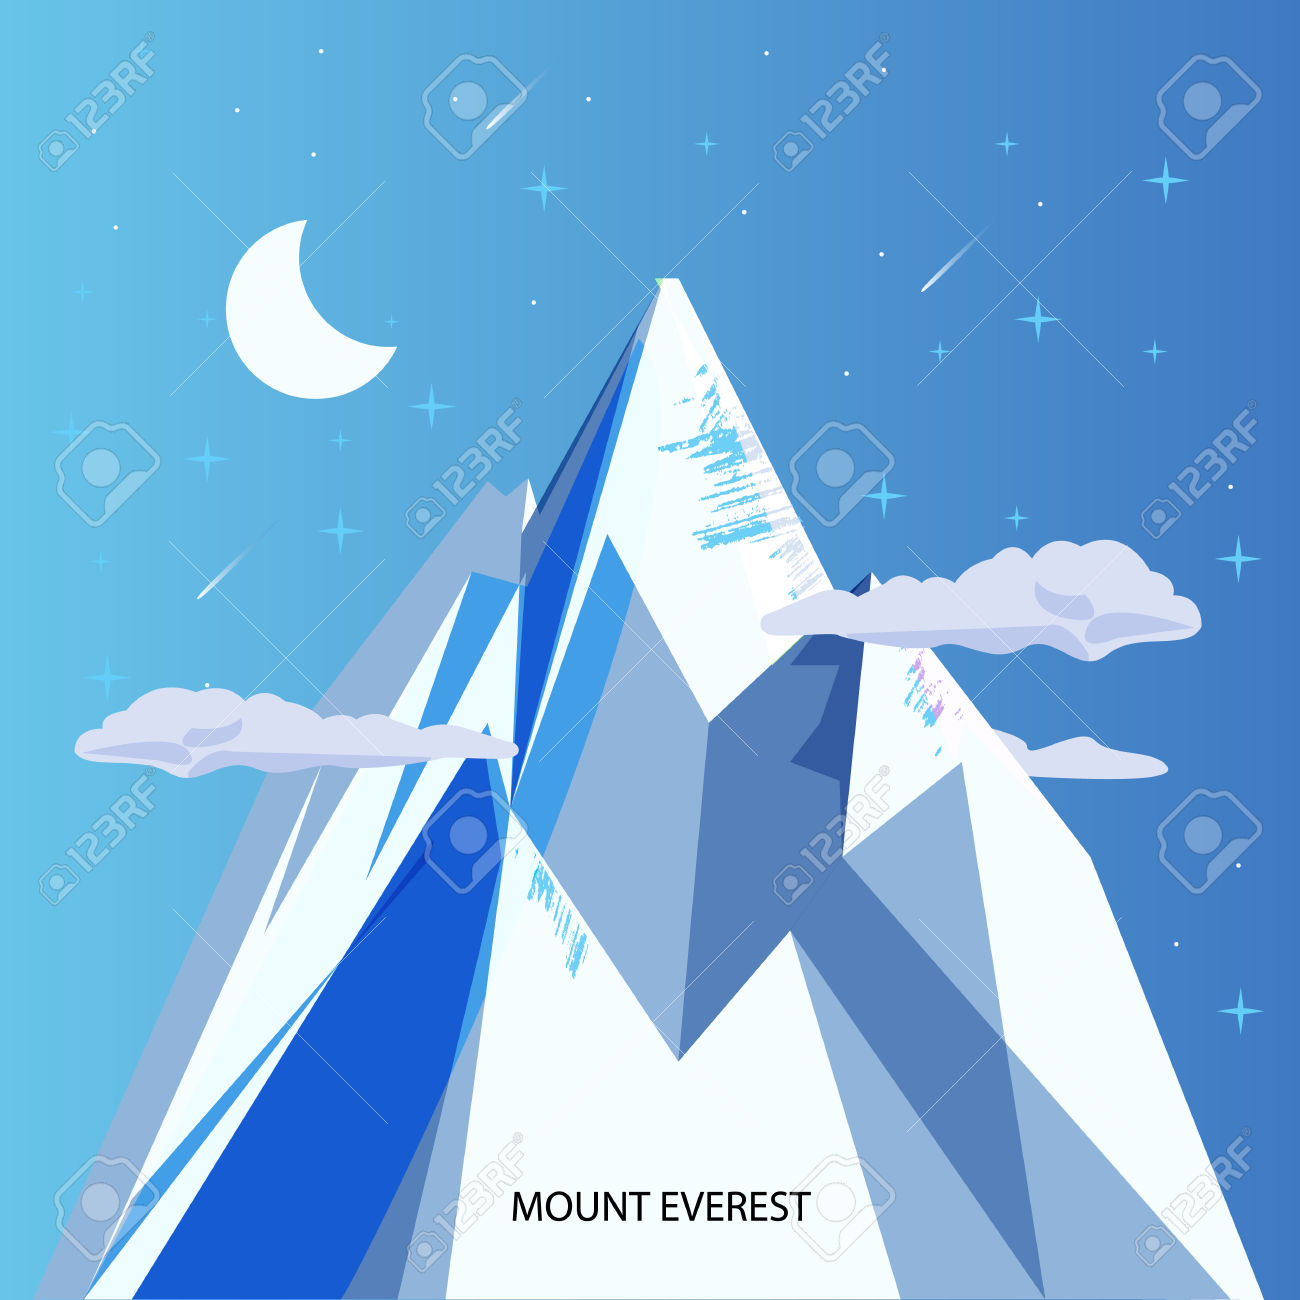 Mount Everest clipart #7, Download drawings